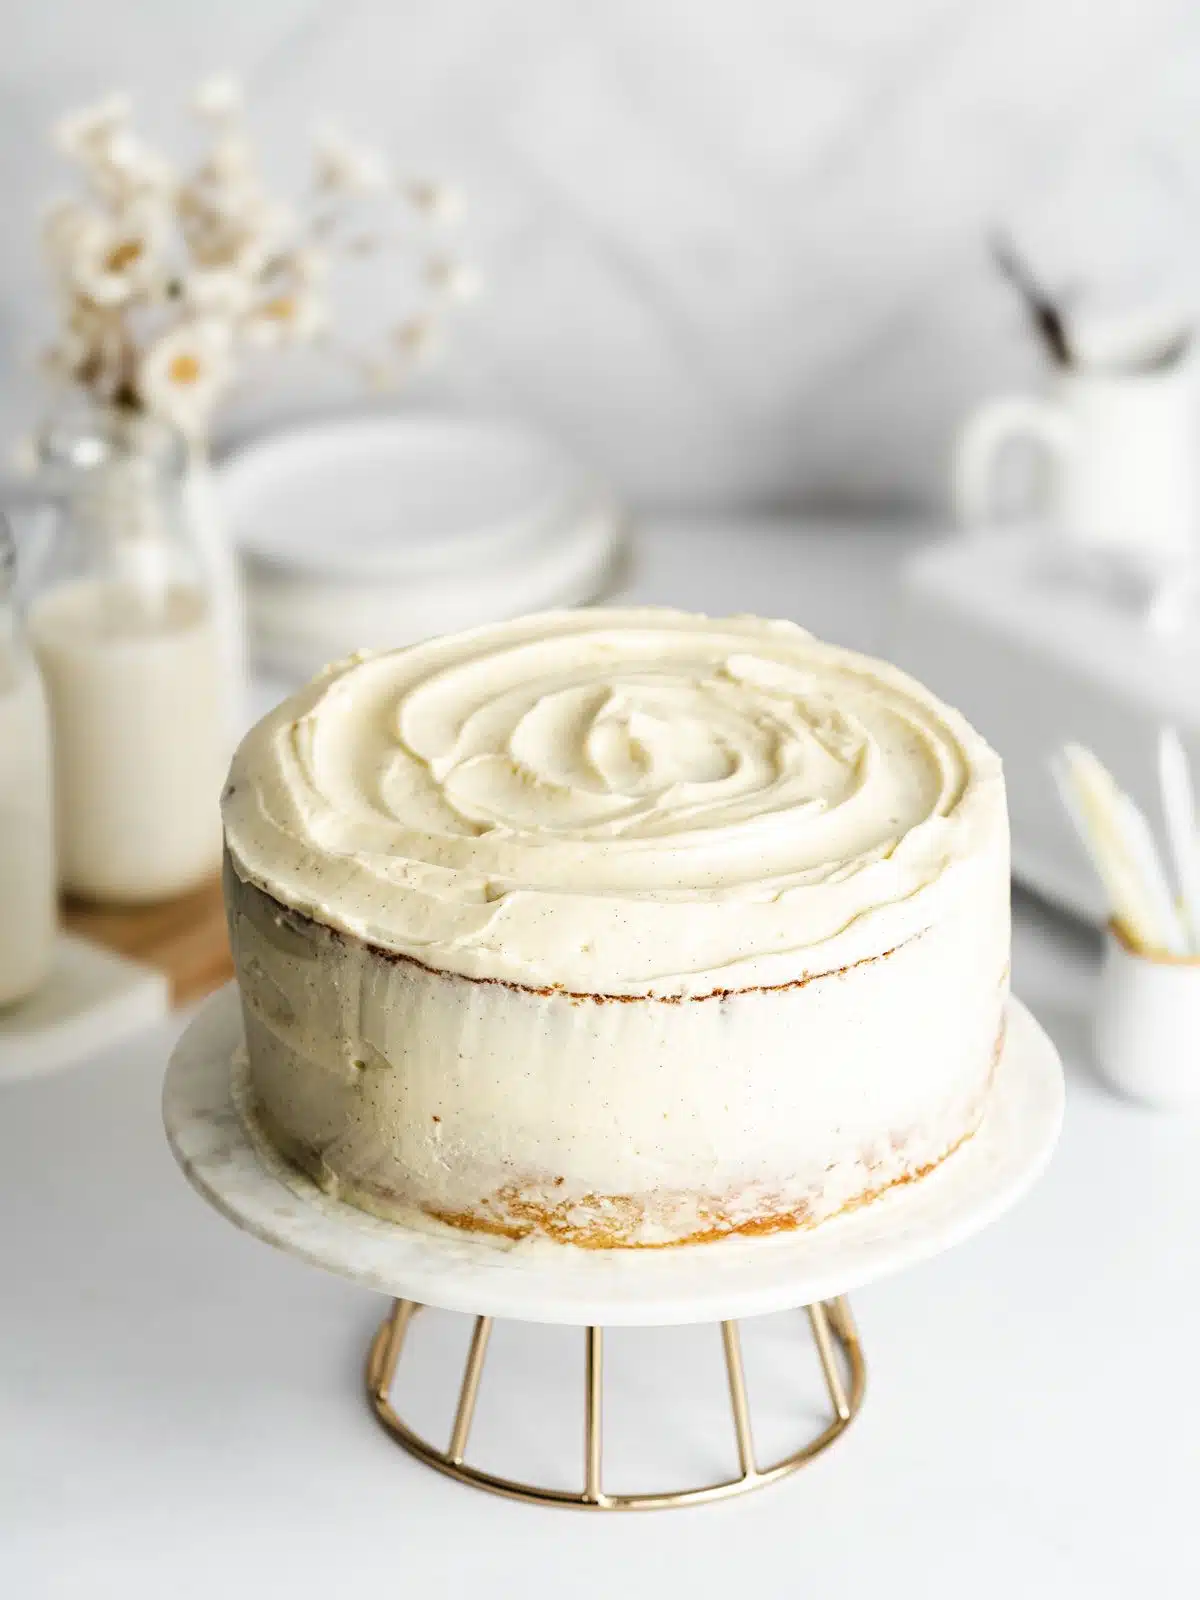 a vanilla cake with swirled vanilla frosting on a marble cake stand with a white background.